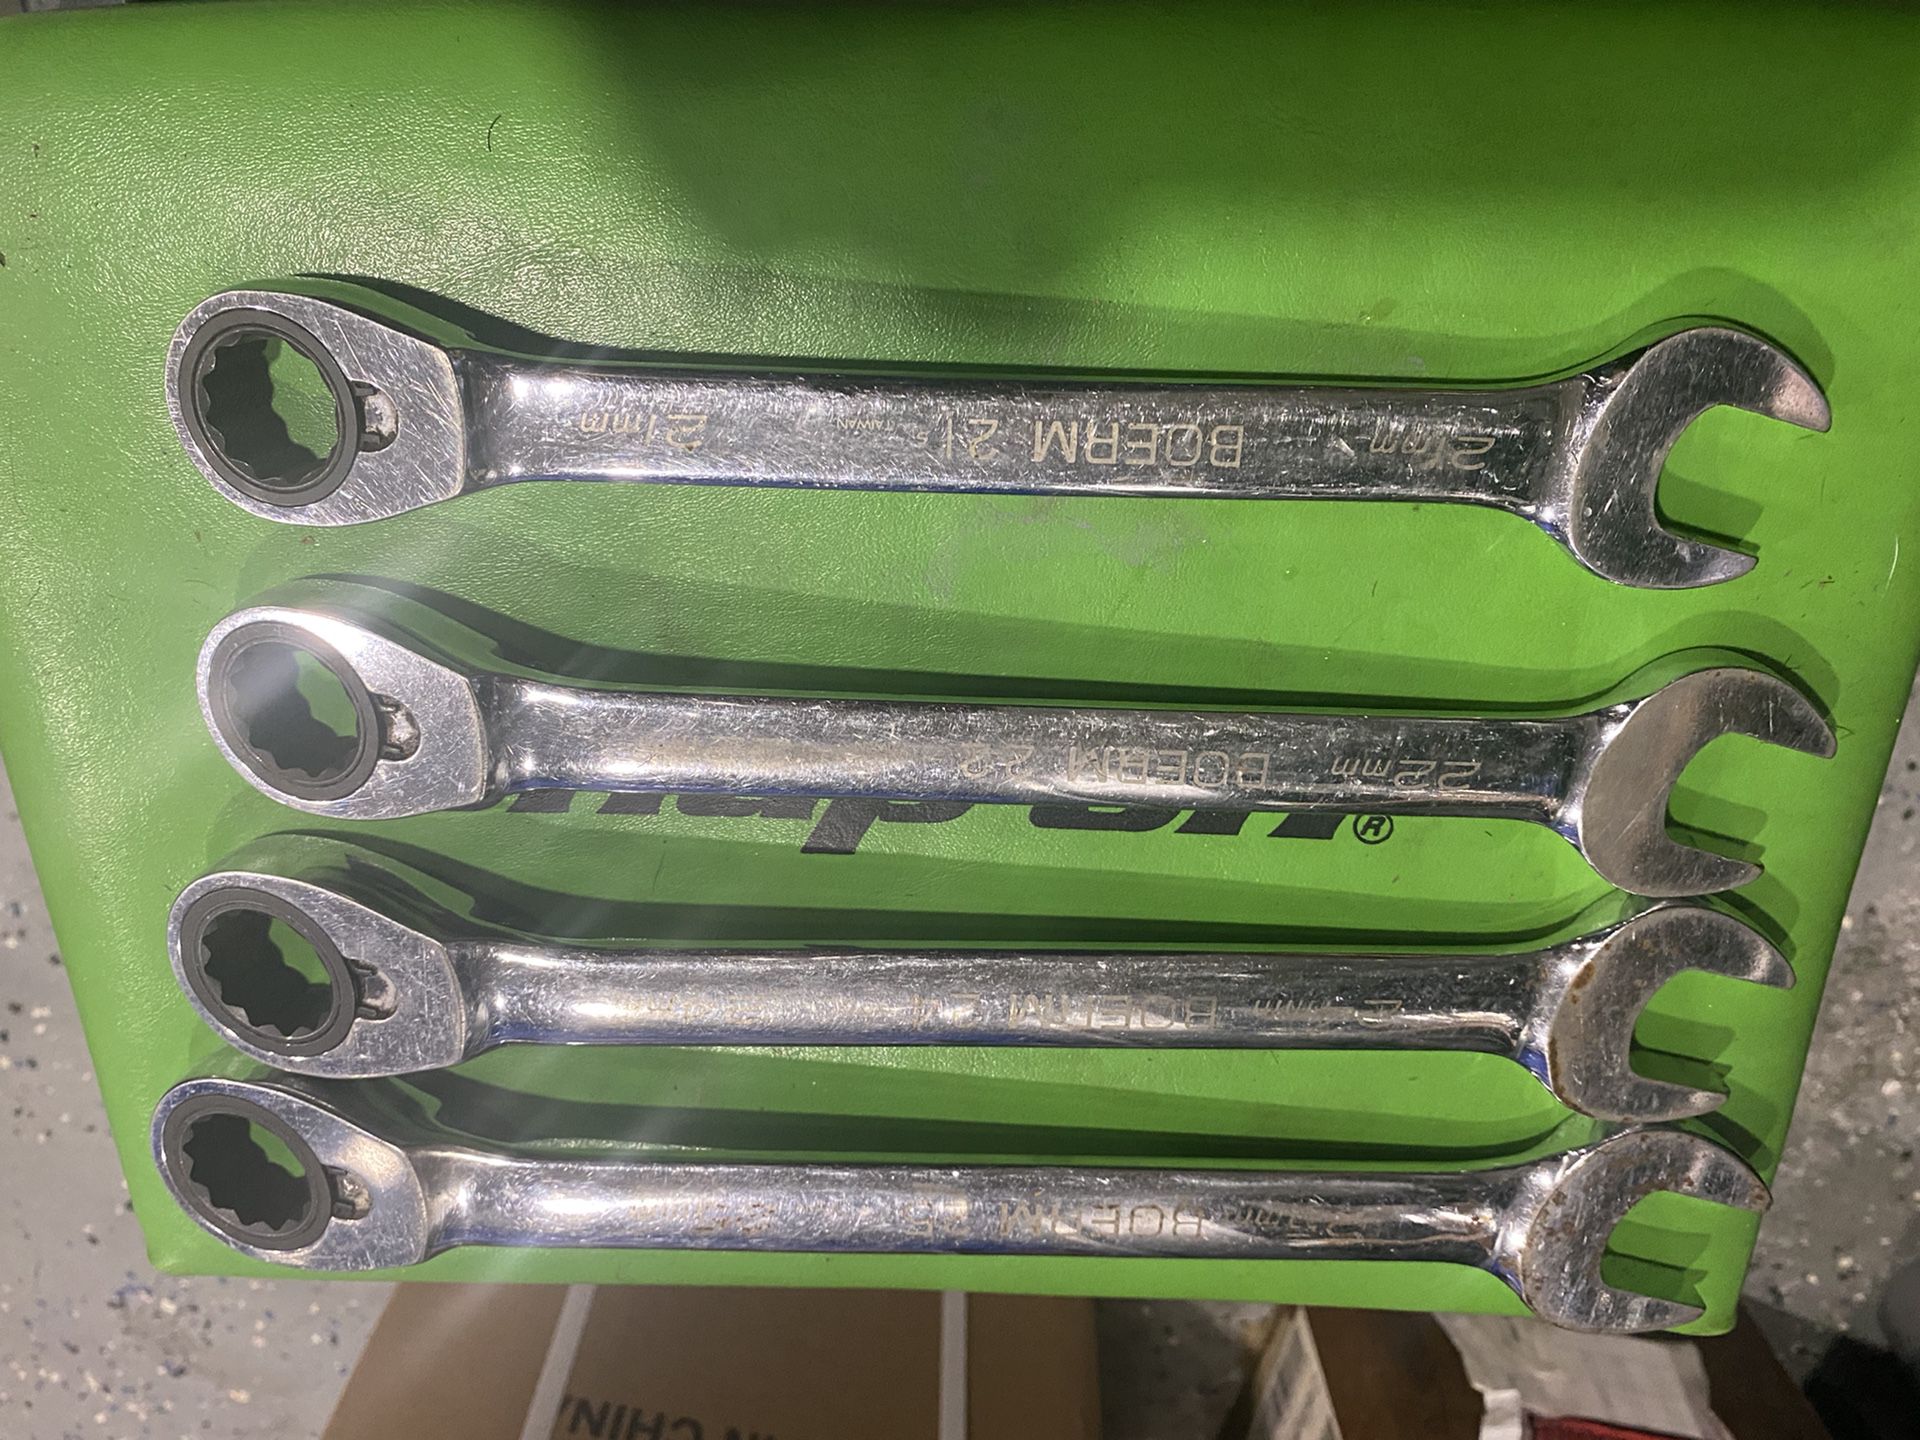 Snap On And Bluepoint Wrenches